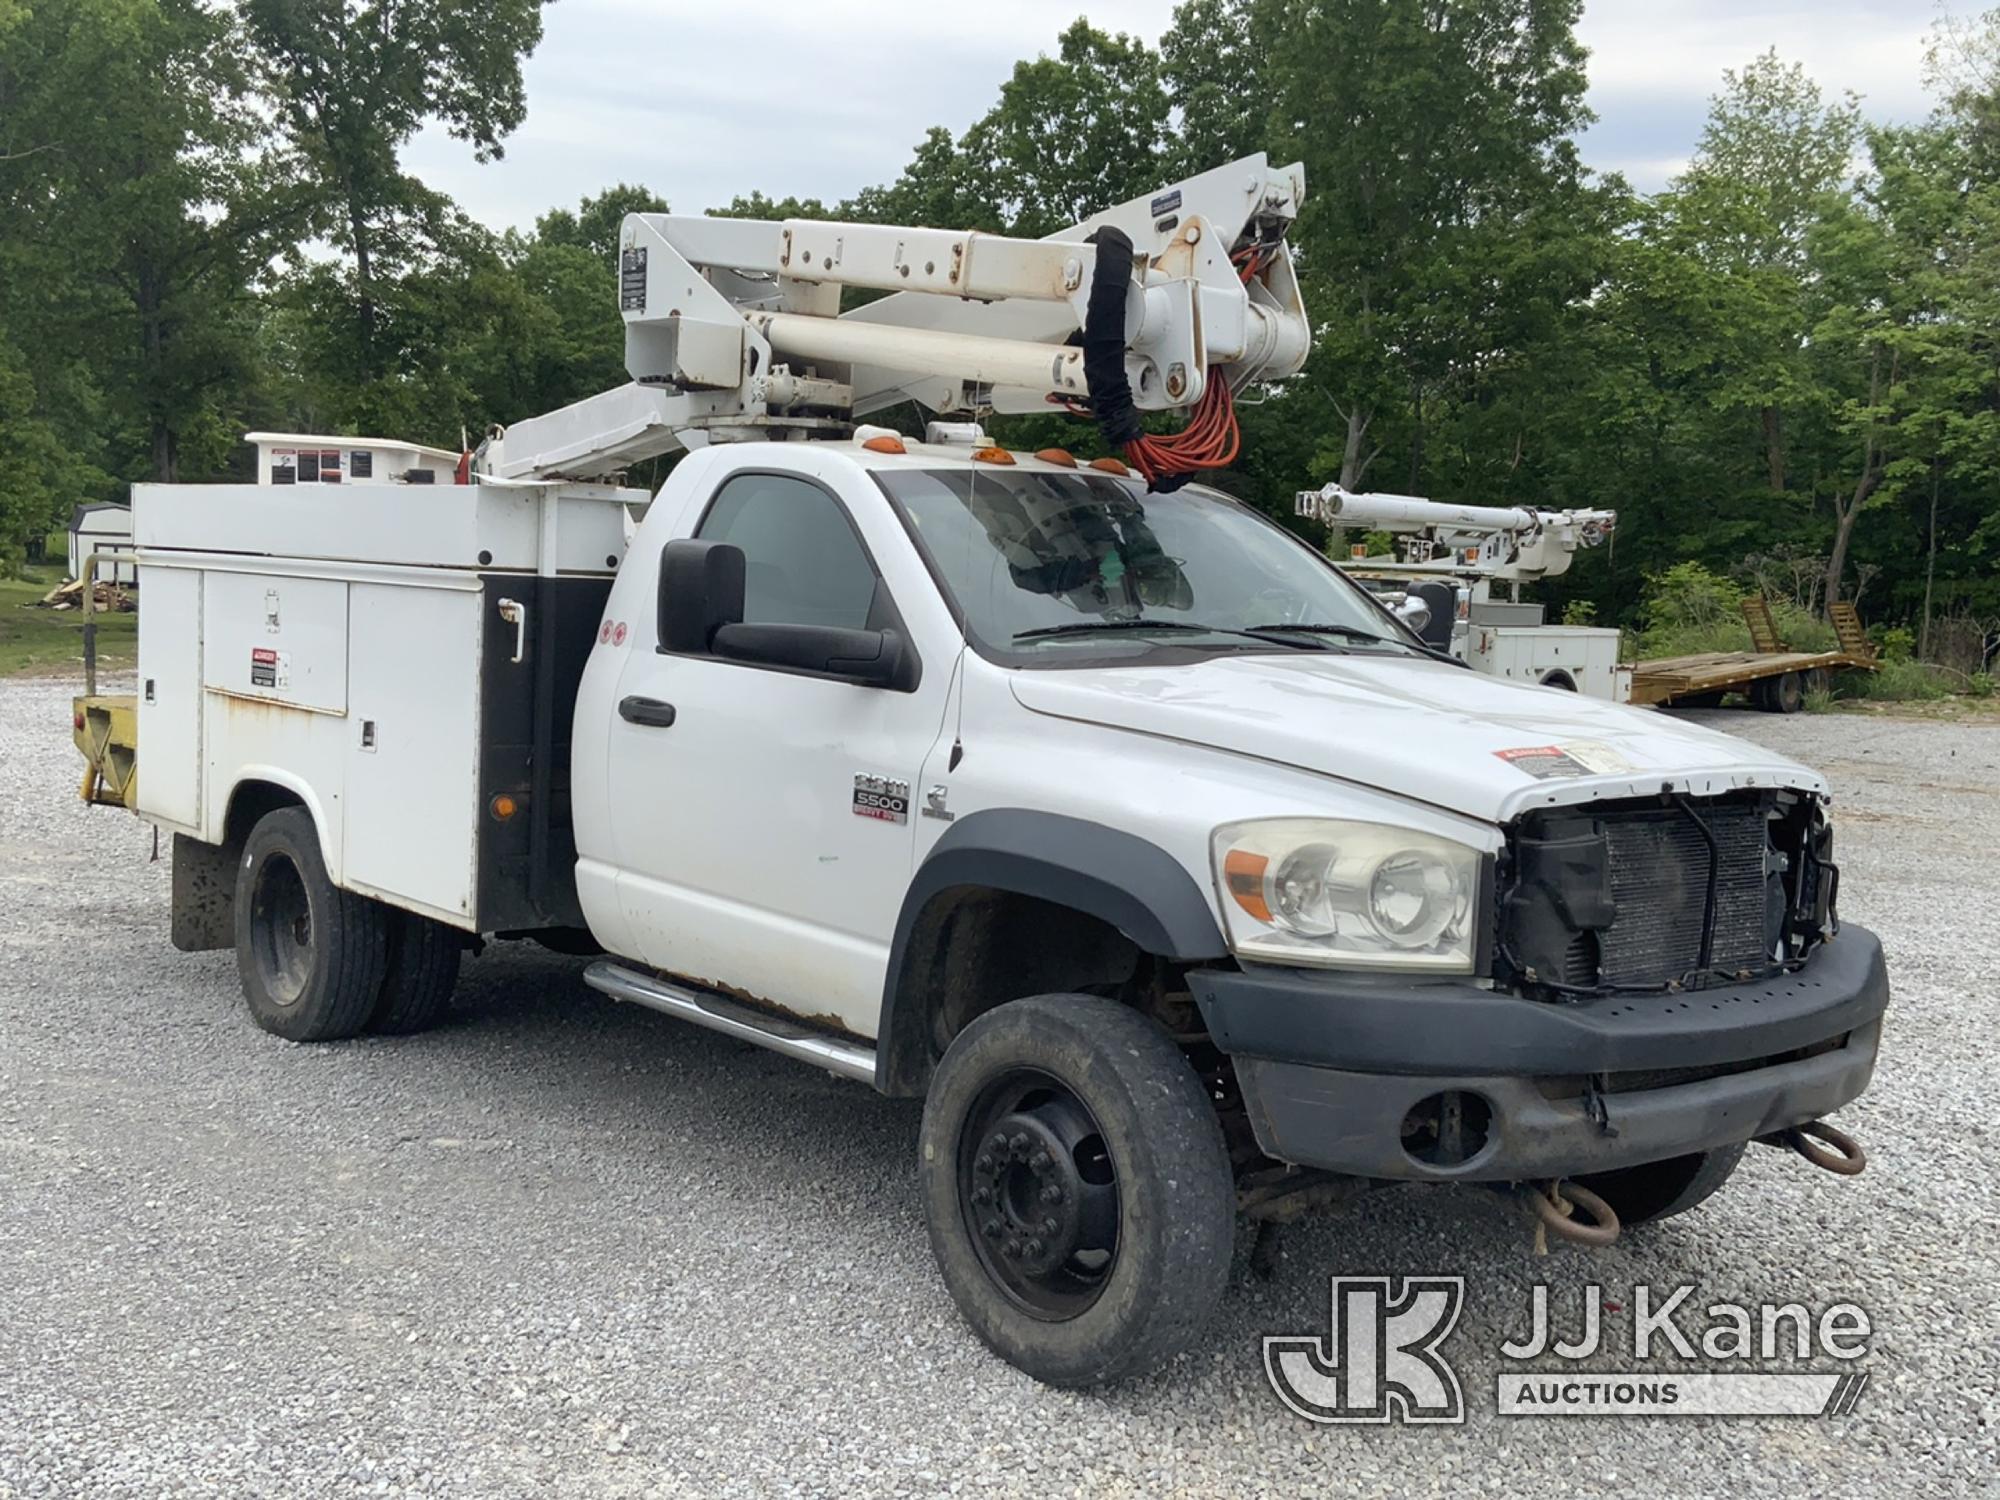 (New Tazewell, TN) Altec AT37G, Articulating & Telescopic Bucket Truck mounted behind cab on 2010 Do